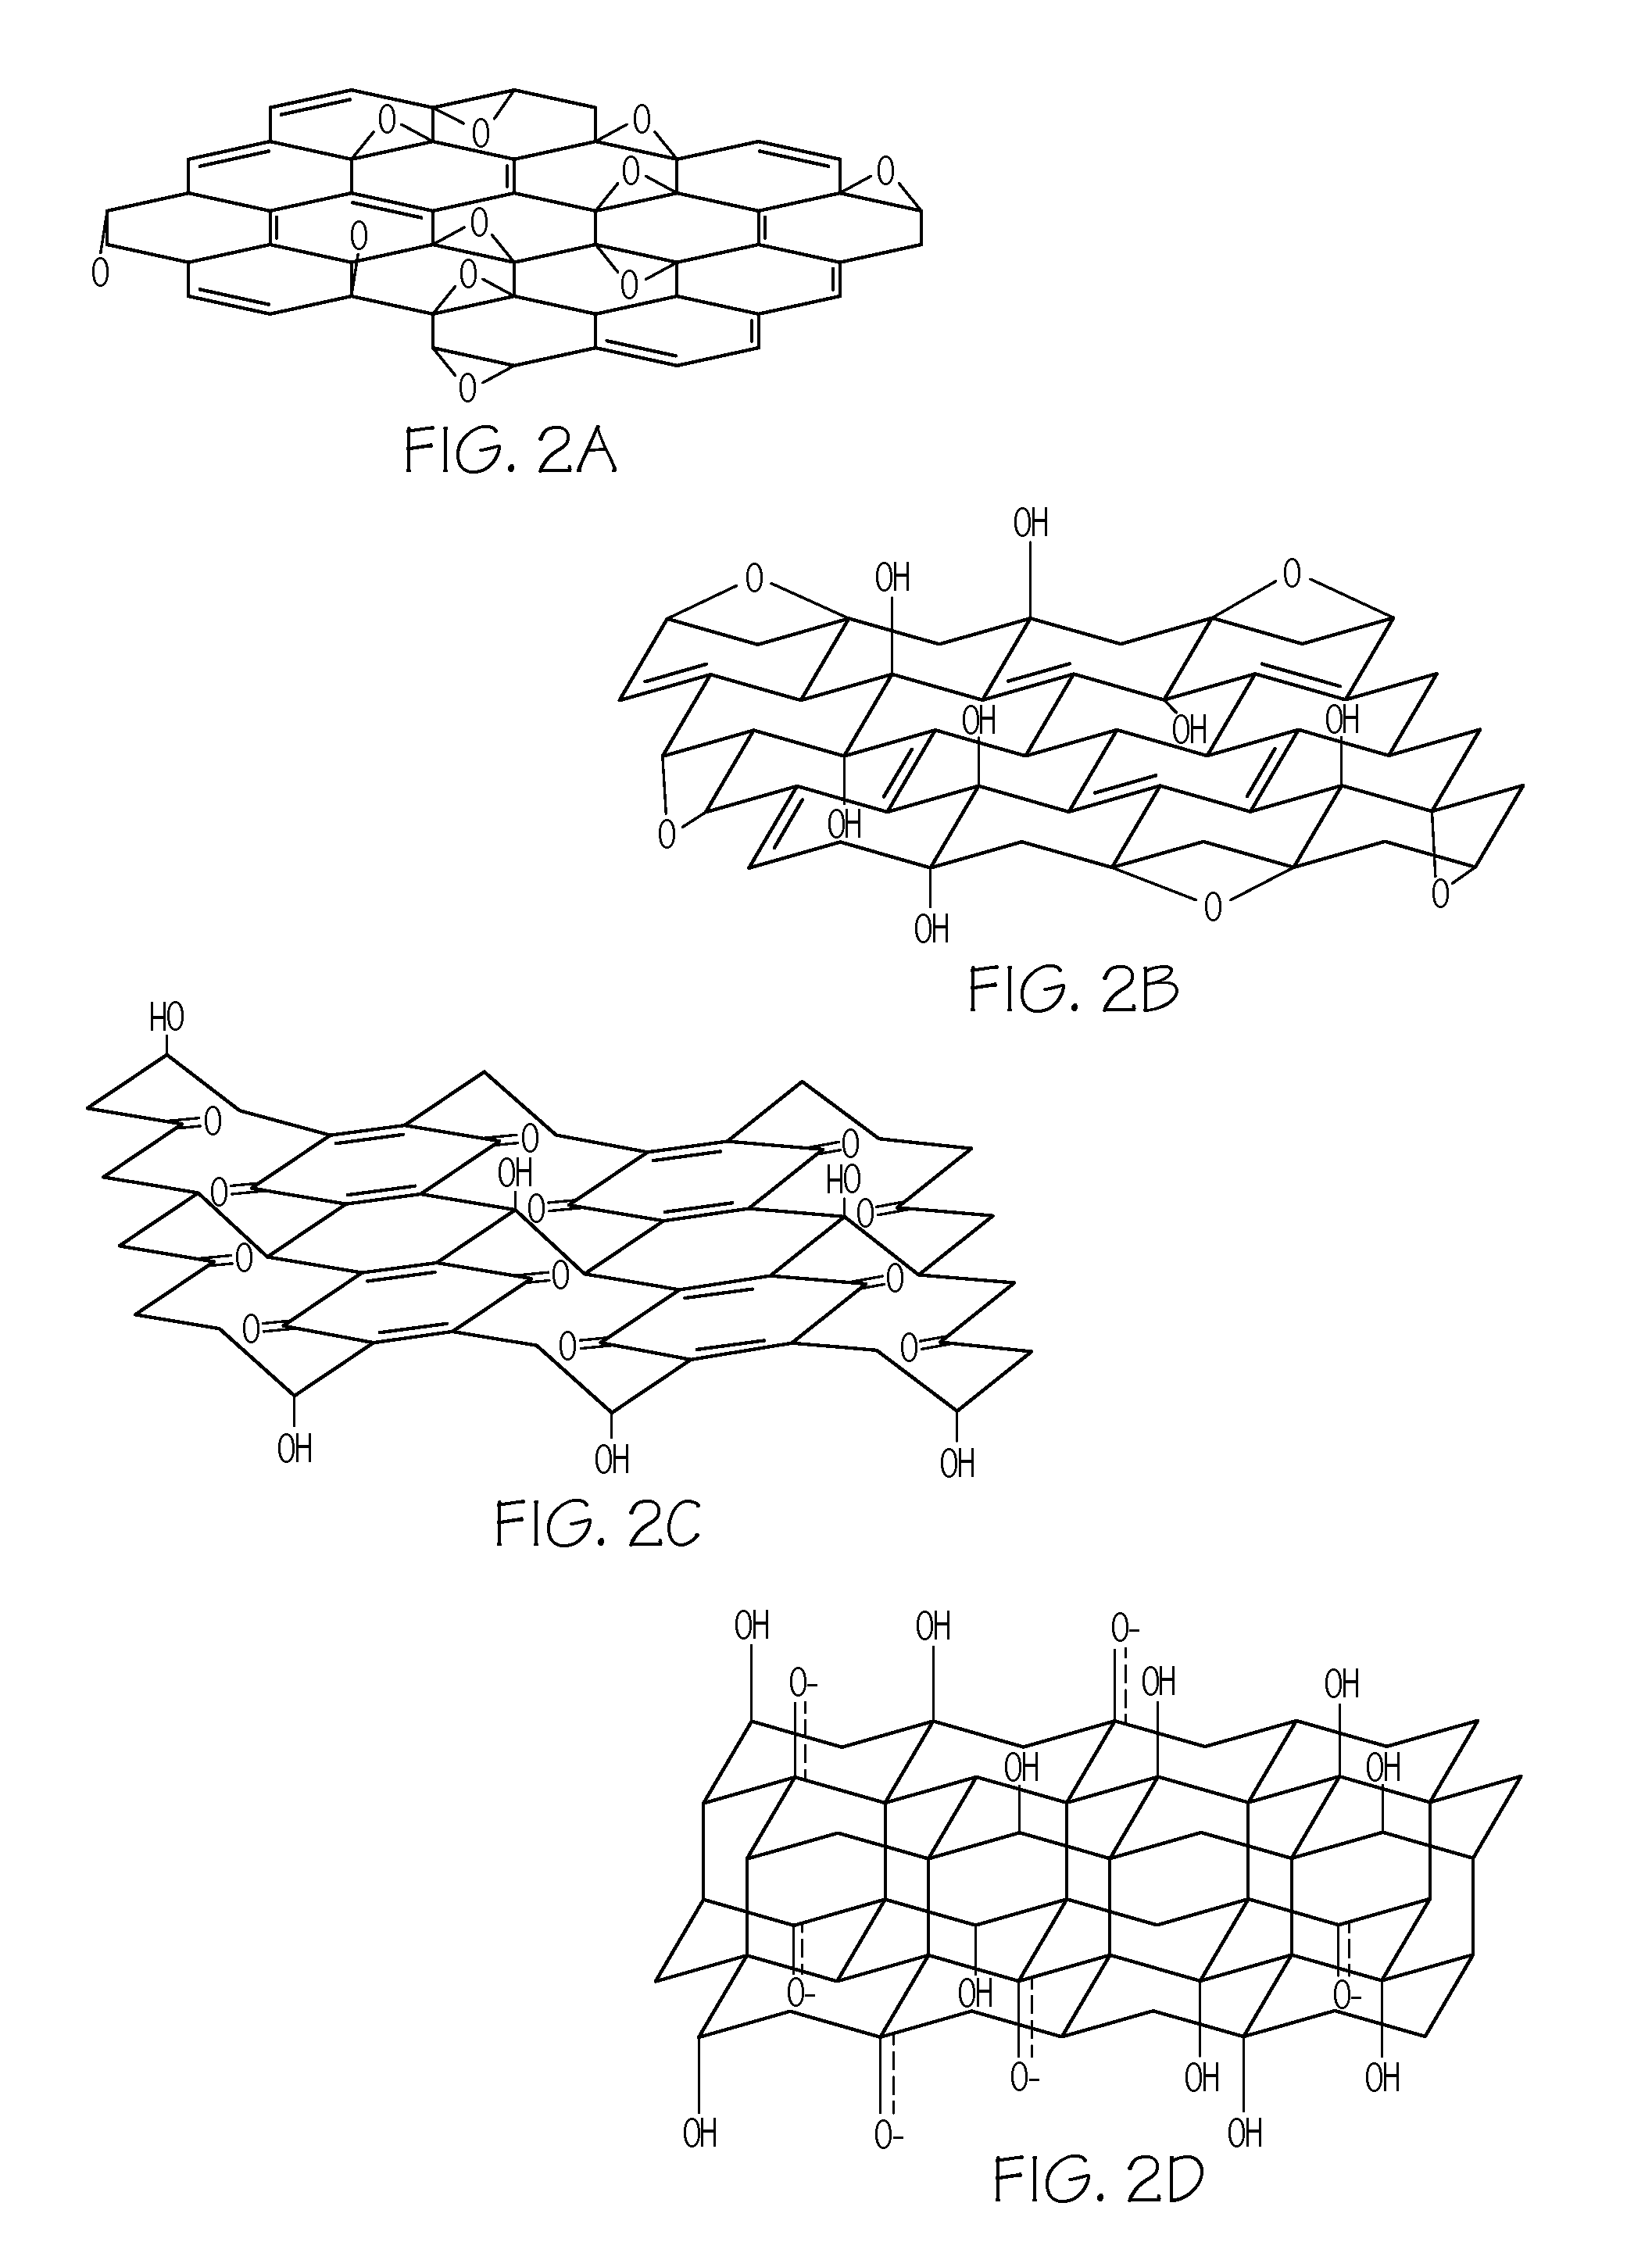 Graphene oxide filters and methods of use